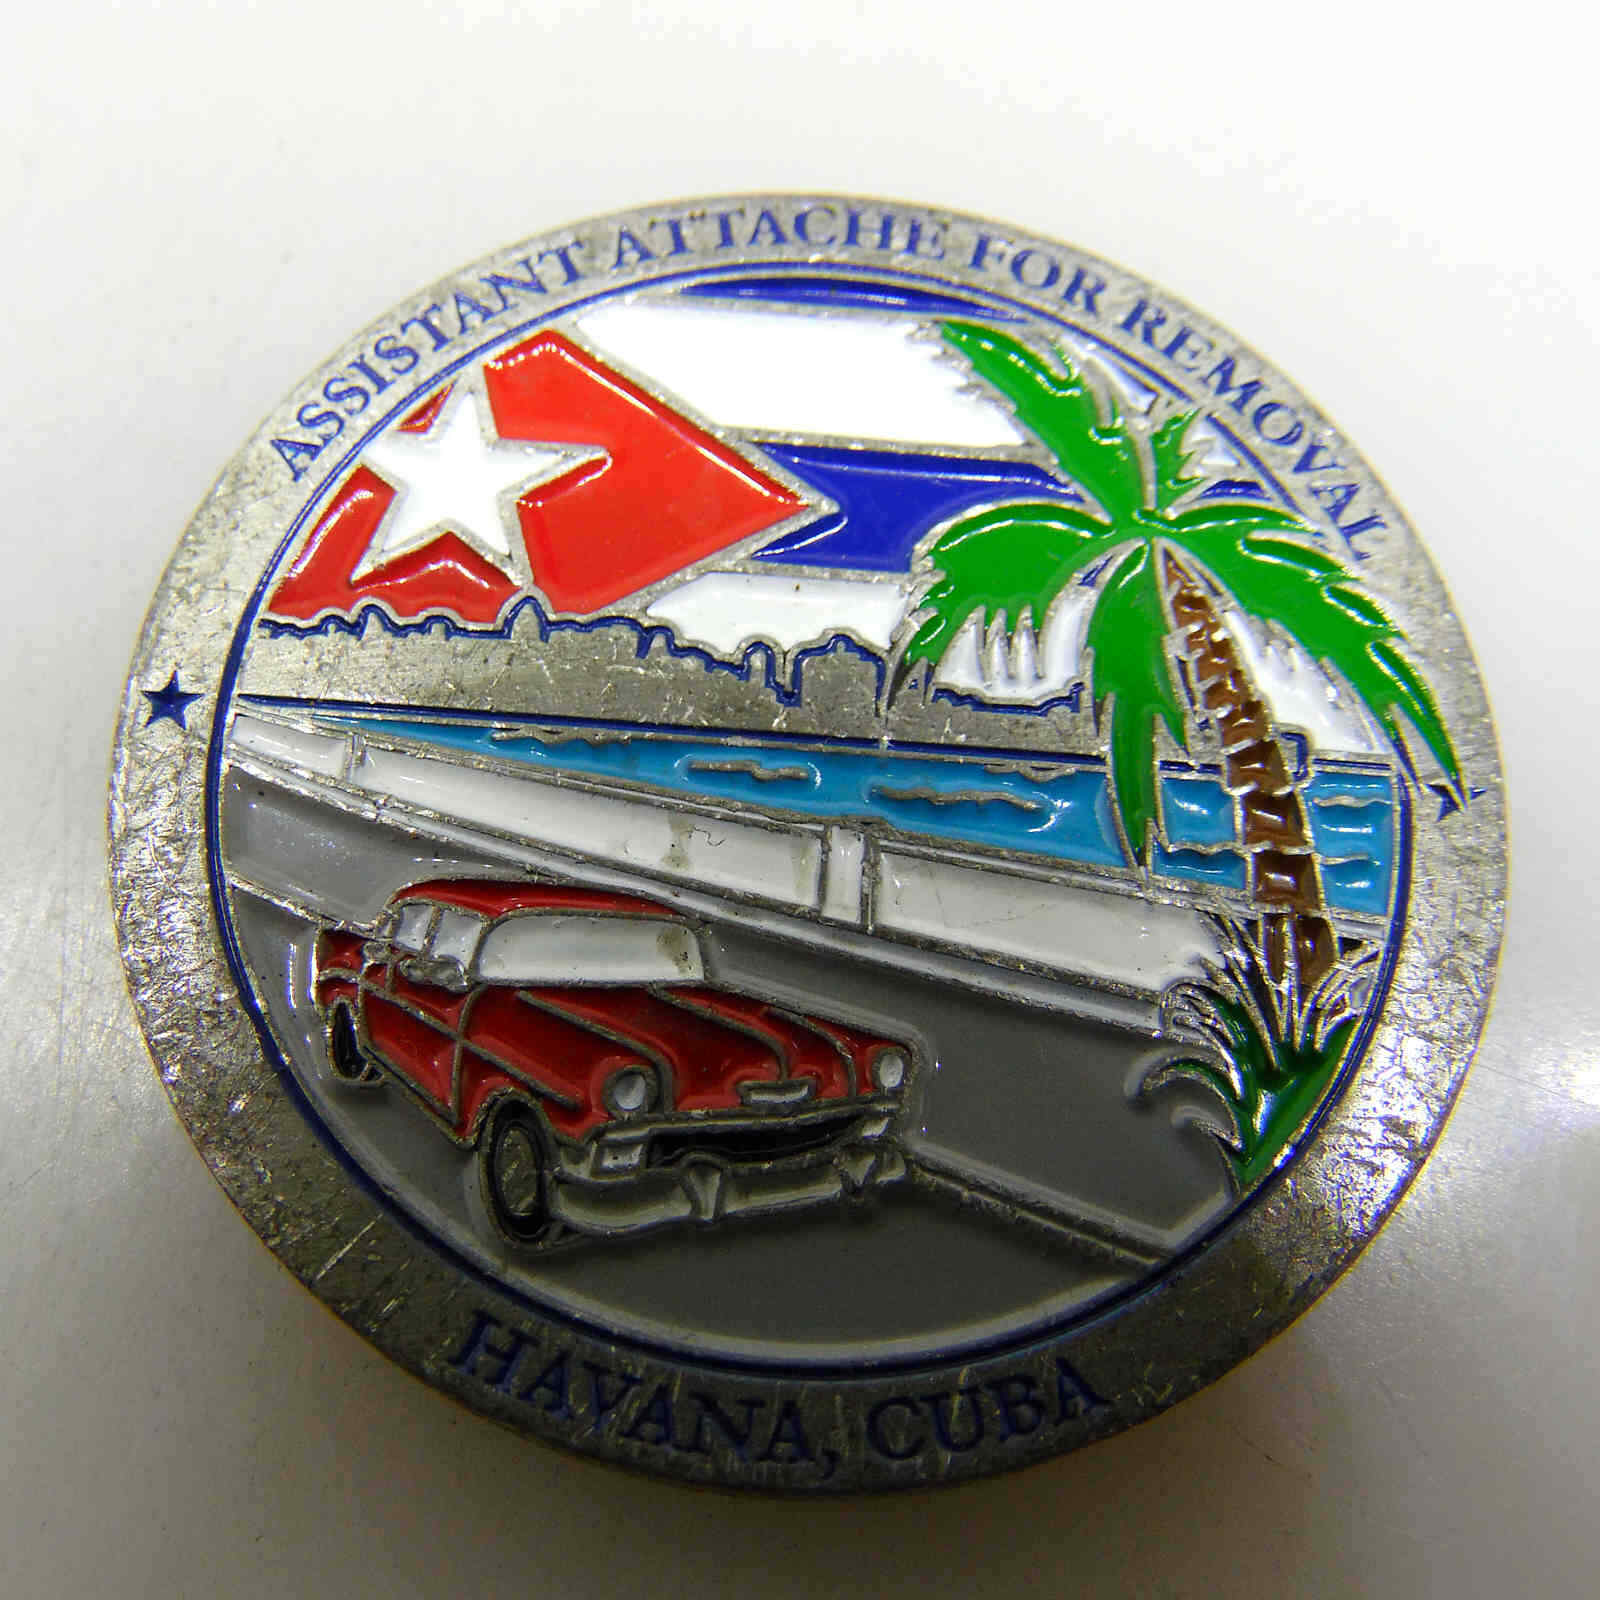 U.S. ICE OFFICER ASSISTANT ATTACHE FOR REMOVAL HAVANA CHALLENGE COIN